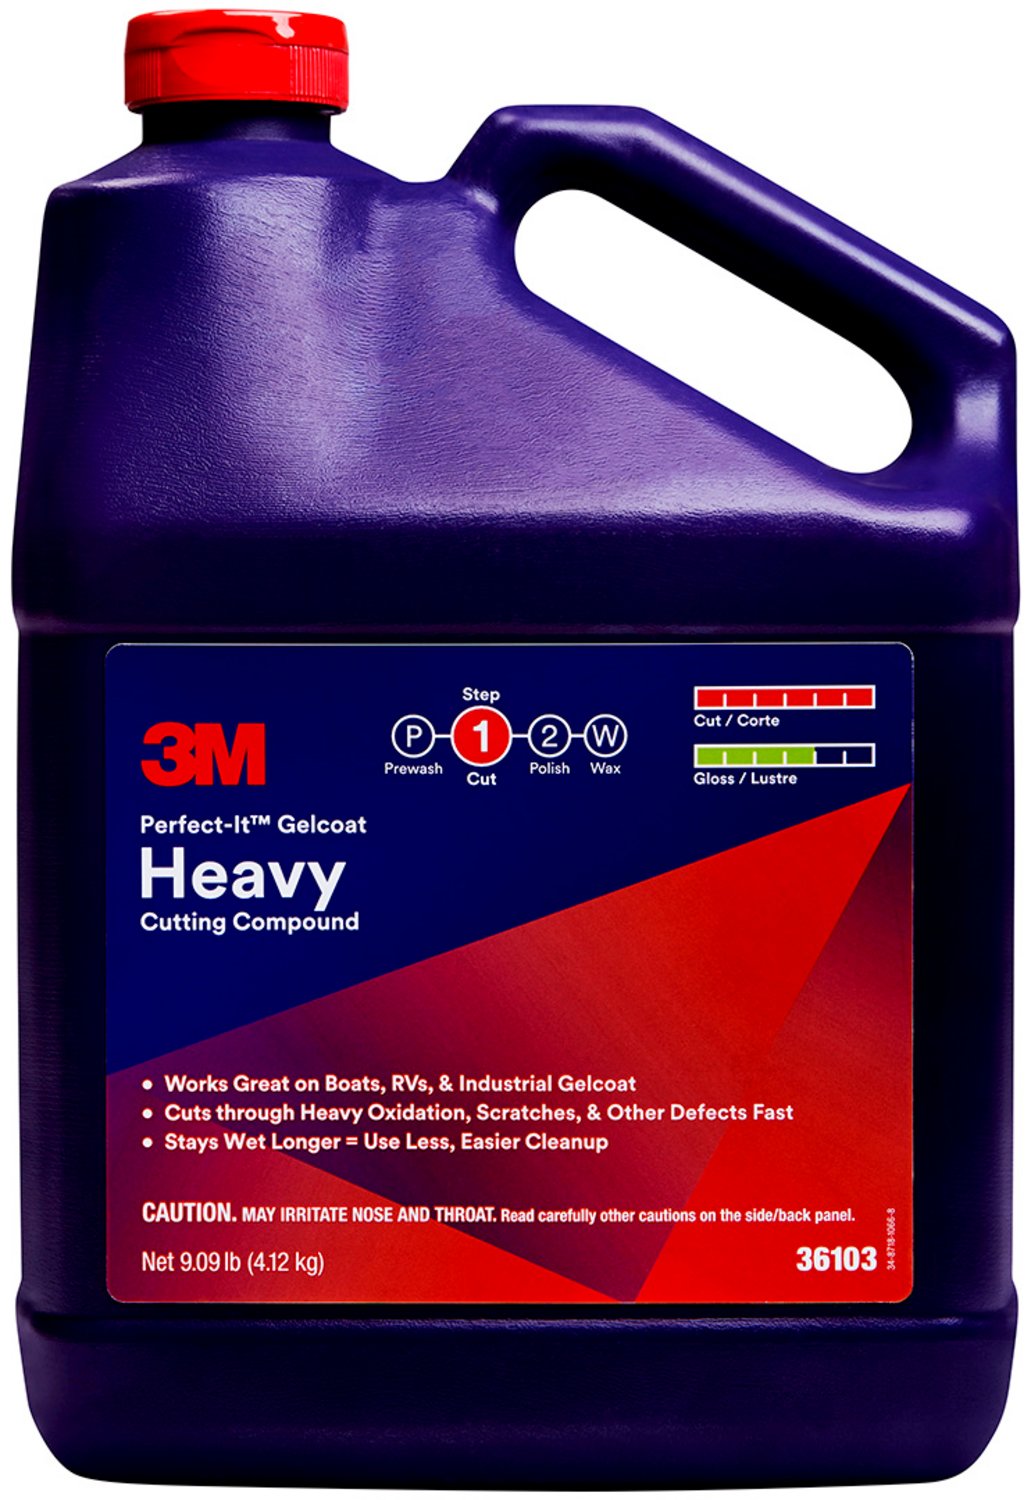 7100210896 - 3M Perfect-It Gelcoat Heavy Cutting Compound, 36103, 1 gallon (9.09
lb), 4 per case